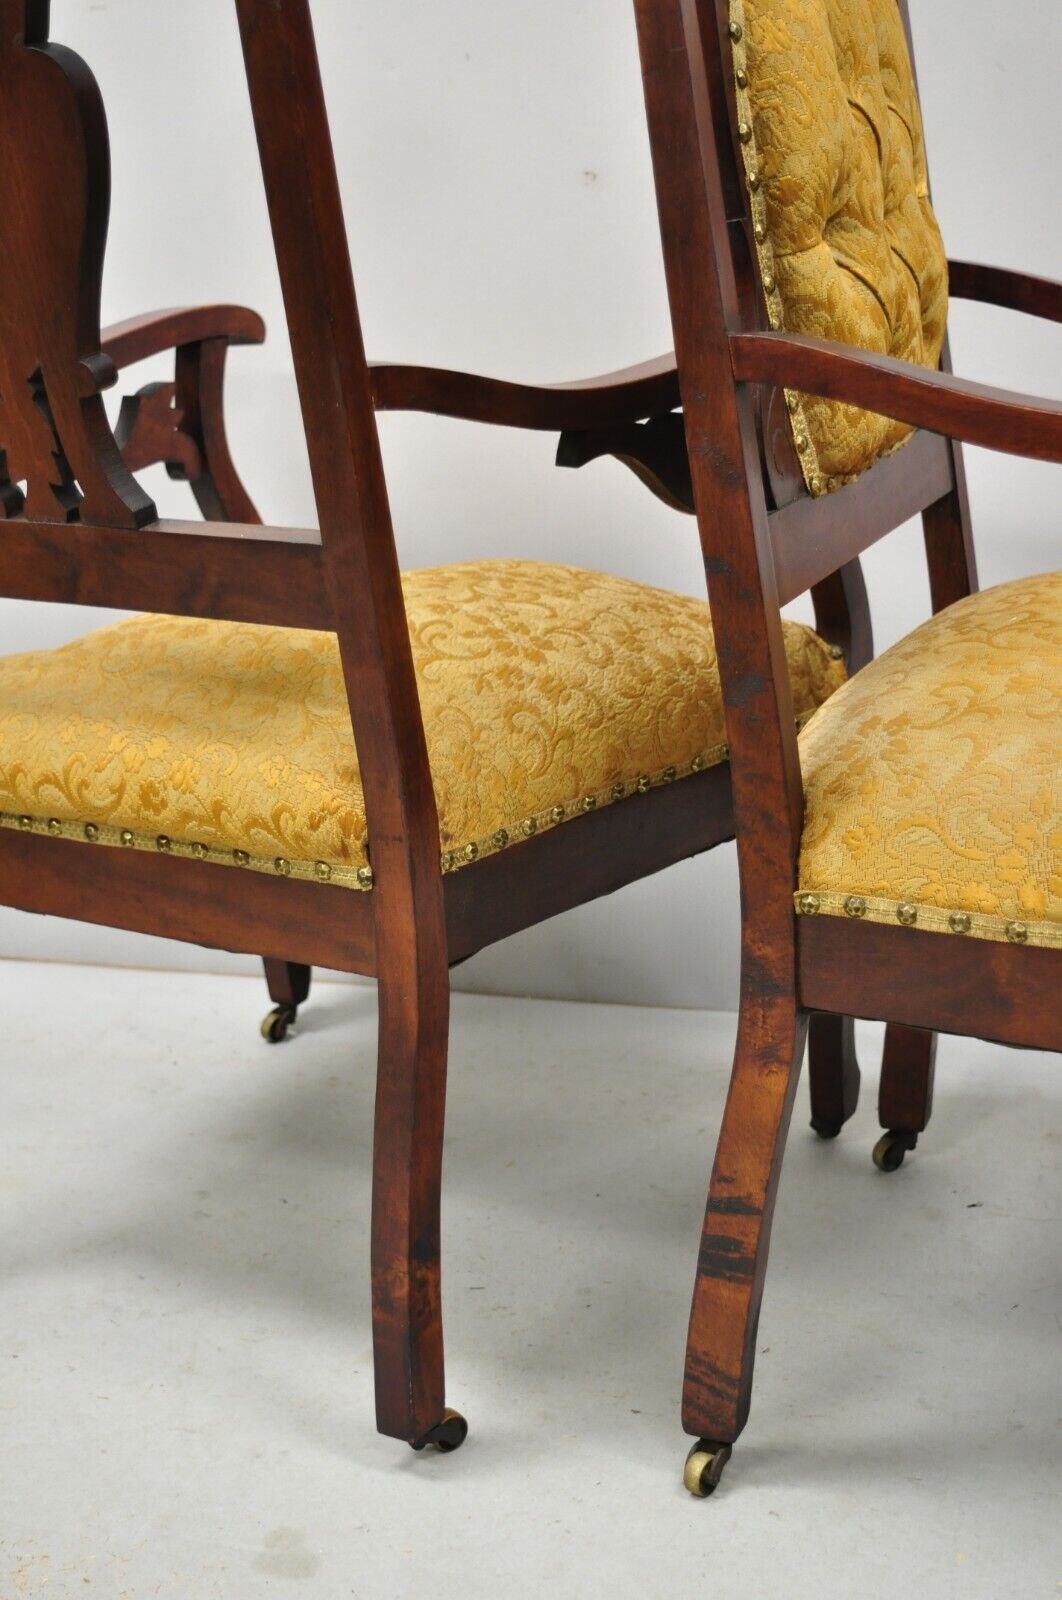 Pair of Antique Eastlake Victorian Mahogany Inlaid Parlor Arm Chairs